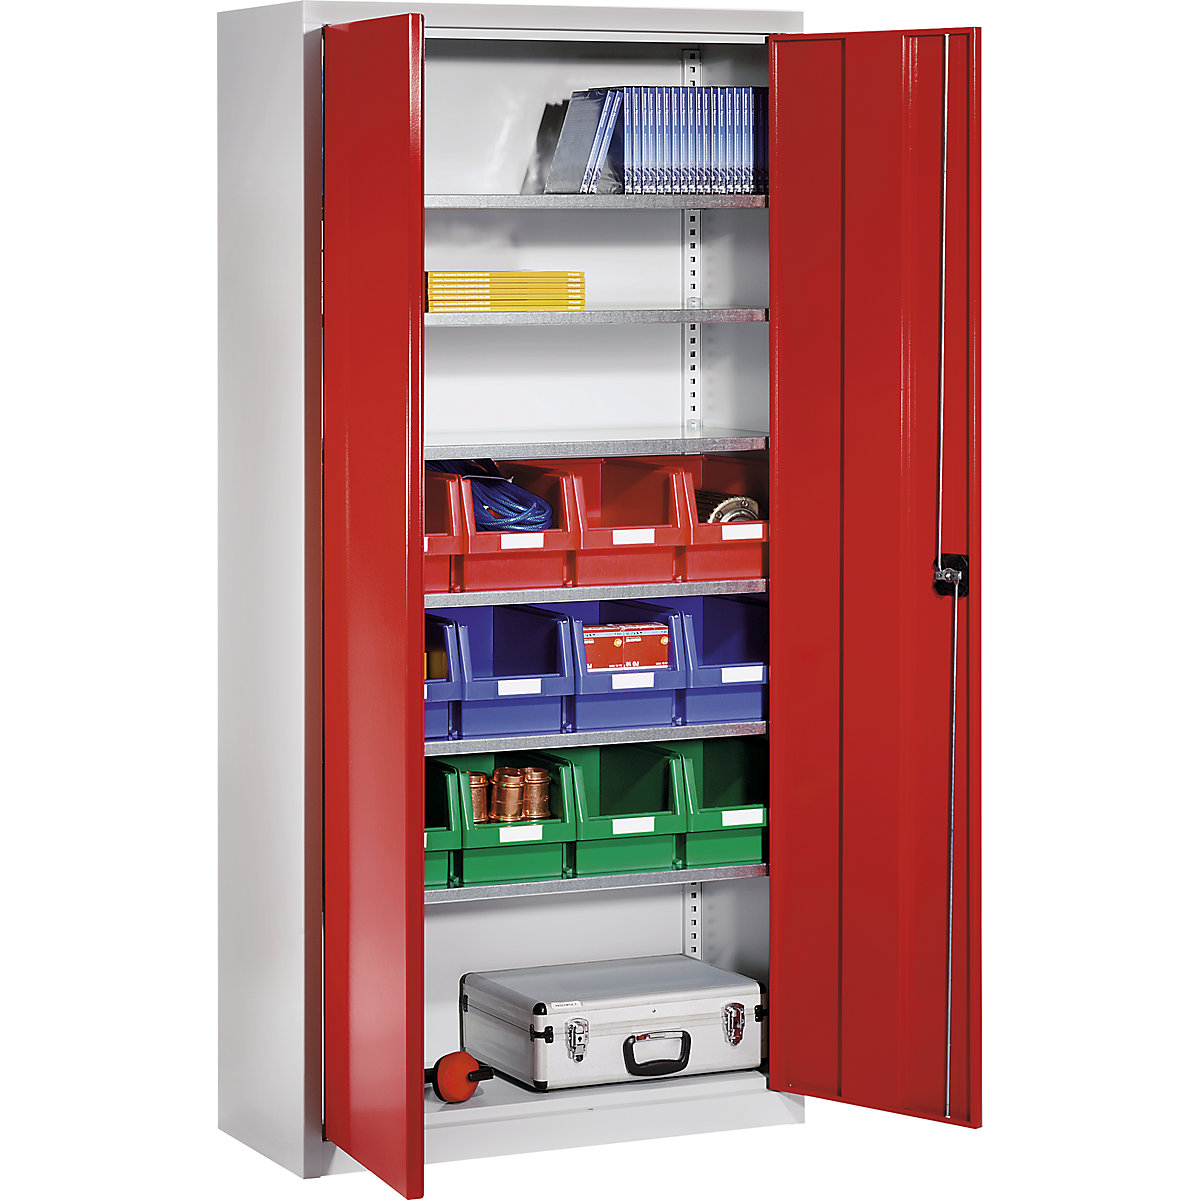 Storage cupboard made of sheet steel – eurokraft pro, with 12 open fronted storage bins, light grey RAL 7035 / traffic red RAL 3020-5